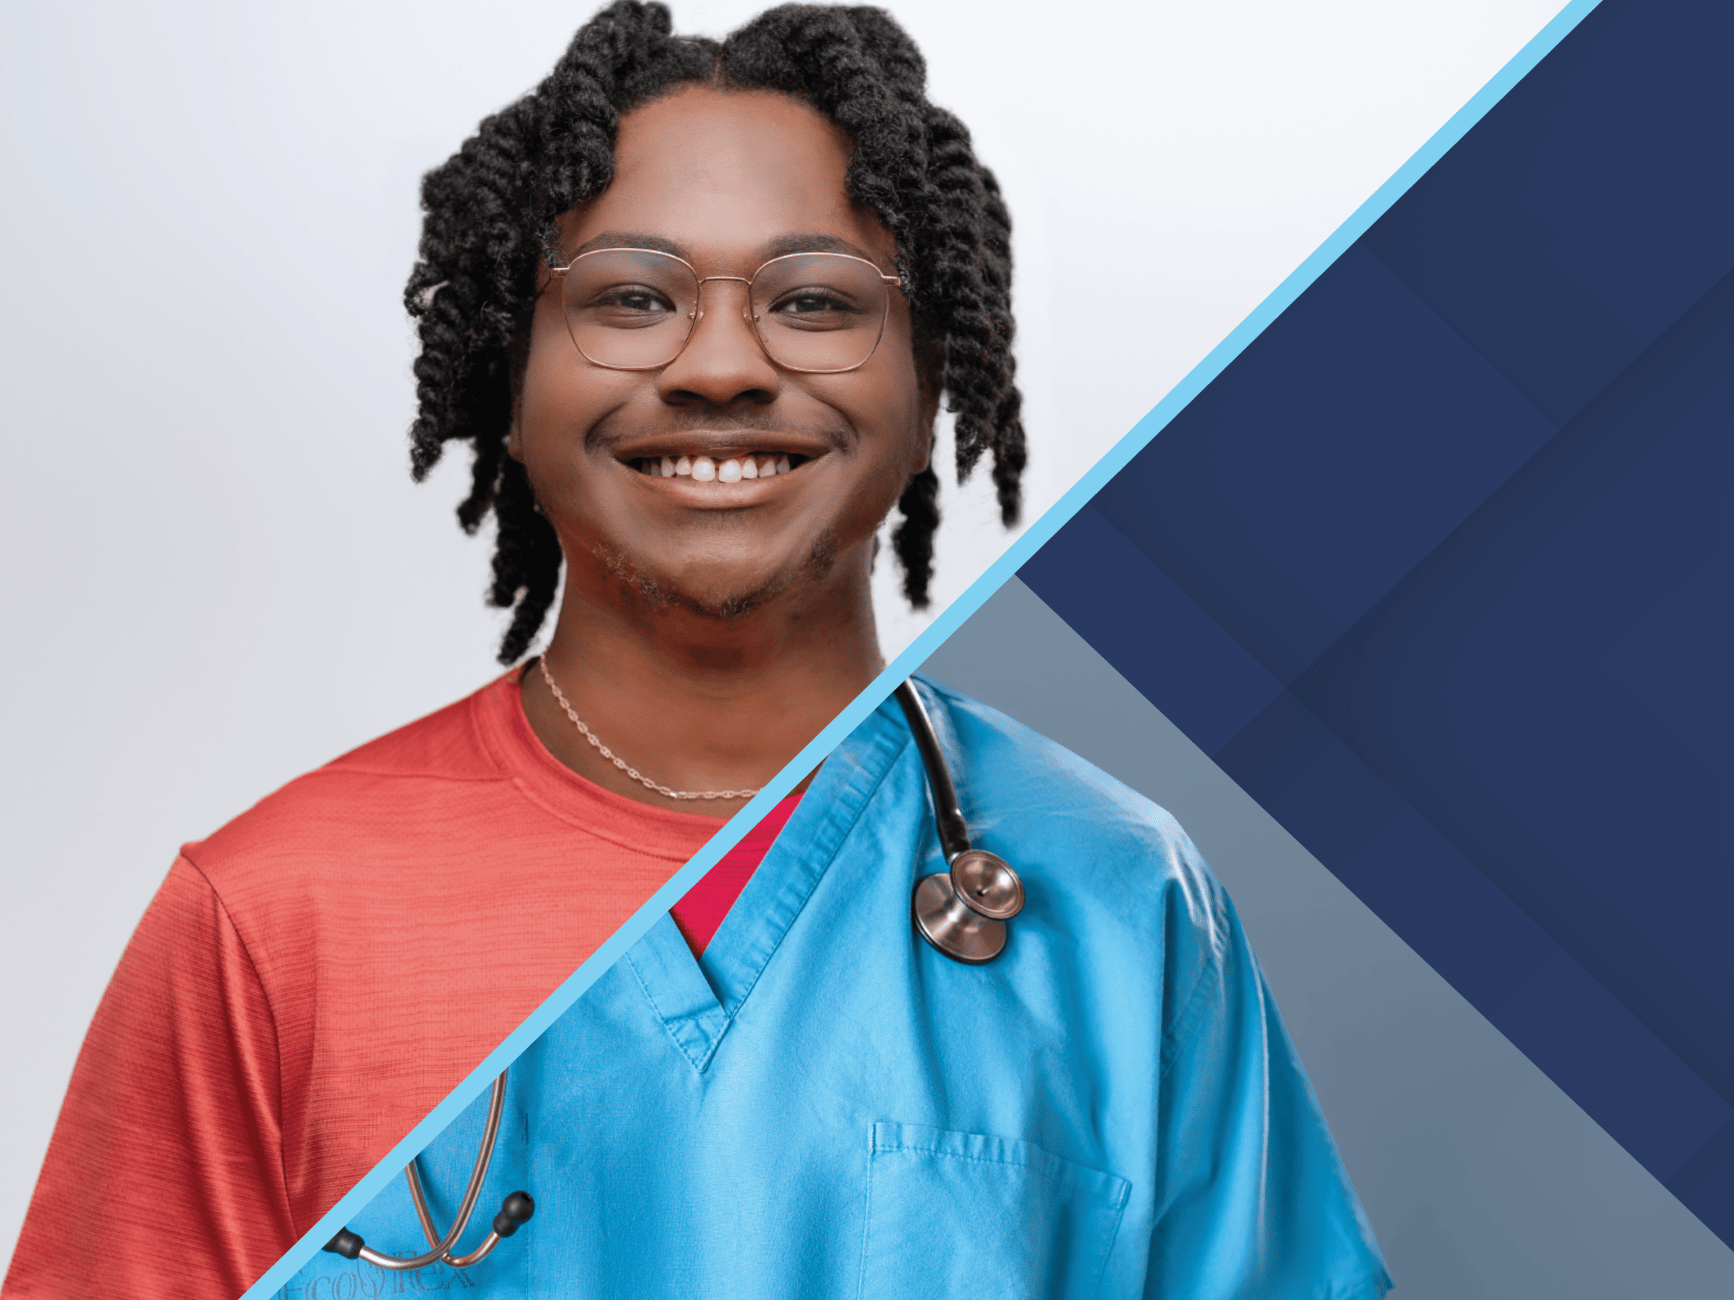 Student smiling, intersected by a diagonal line, top half in street wear, bottom half in scrubs